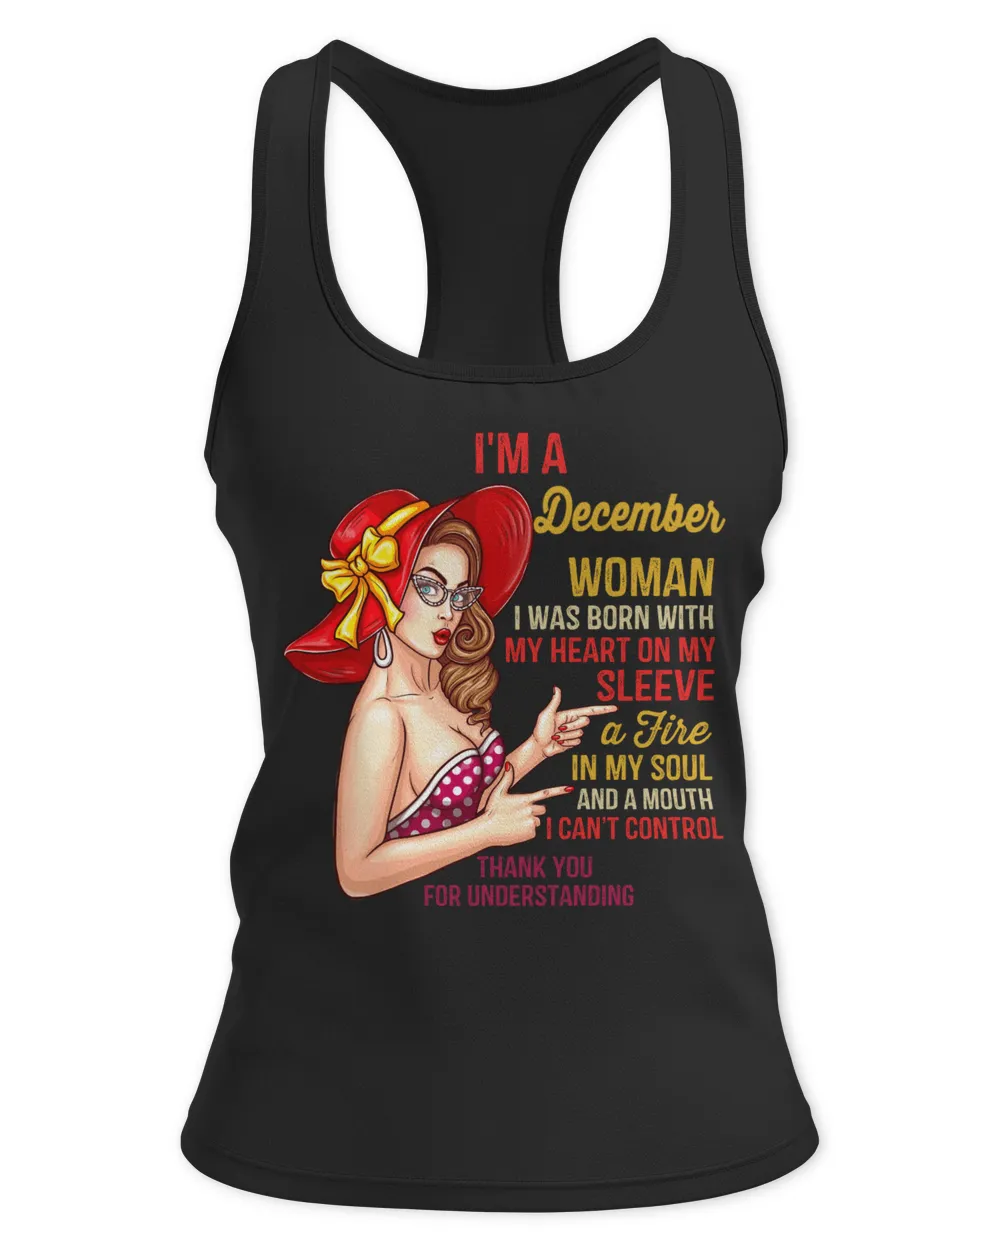 [Personalize] Woman i was